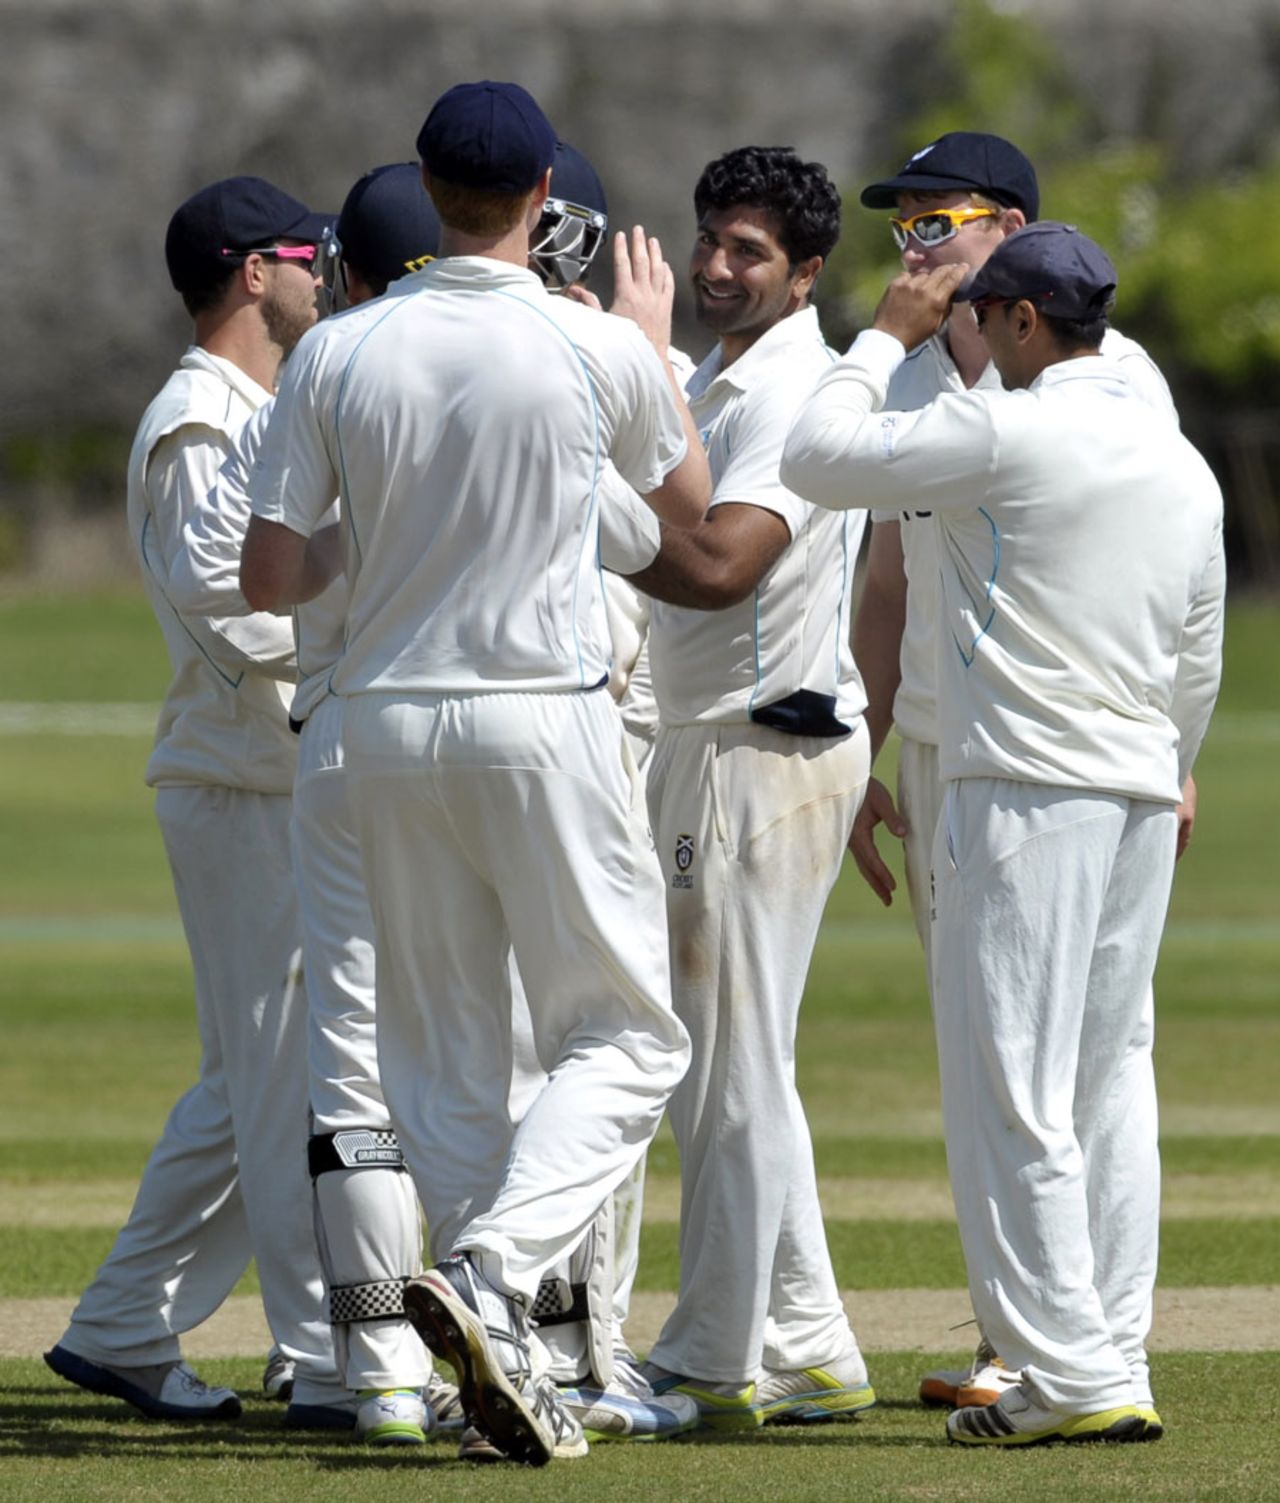 Majid Haq celebrates a wicket with his team-mates , Scotland v Kenya, ICC Intercontinental Cup, 2nd day, Aberdeen, July 8, 2013